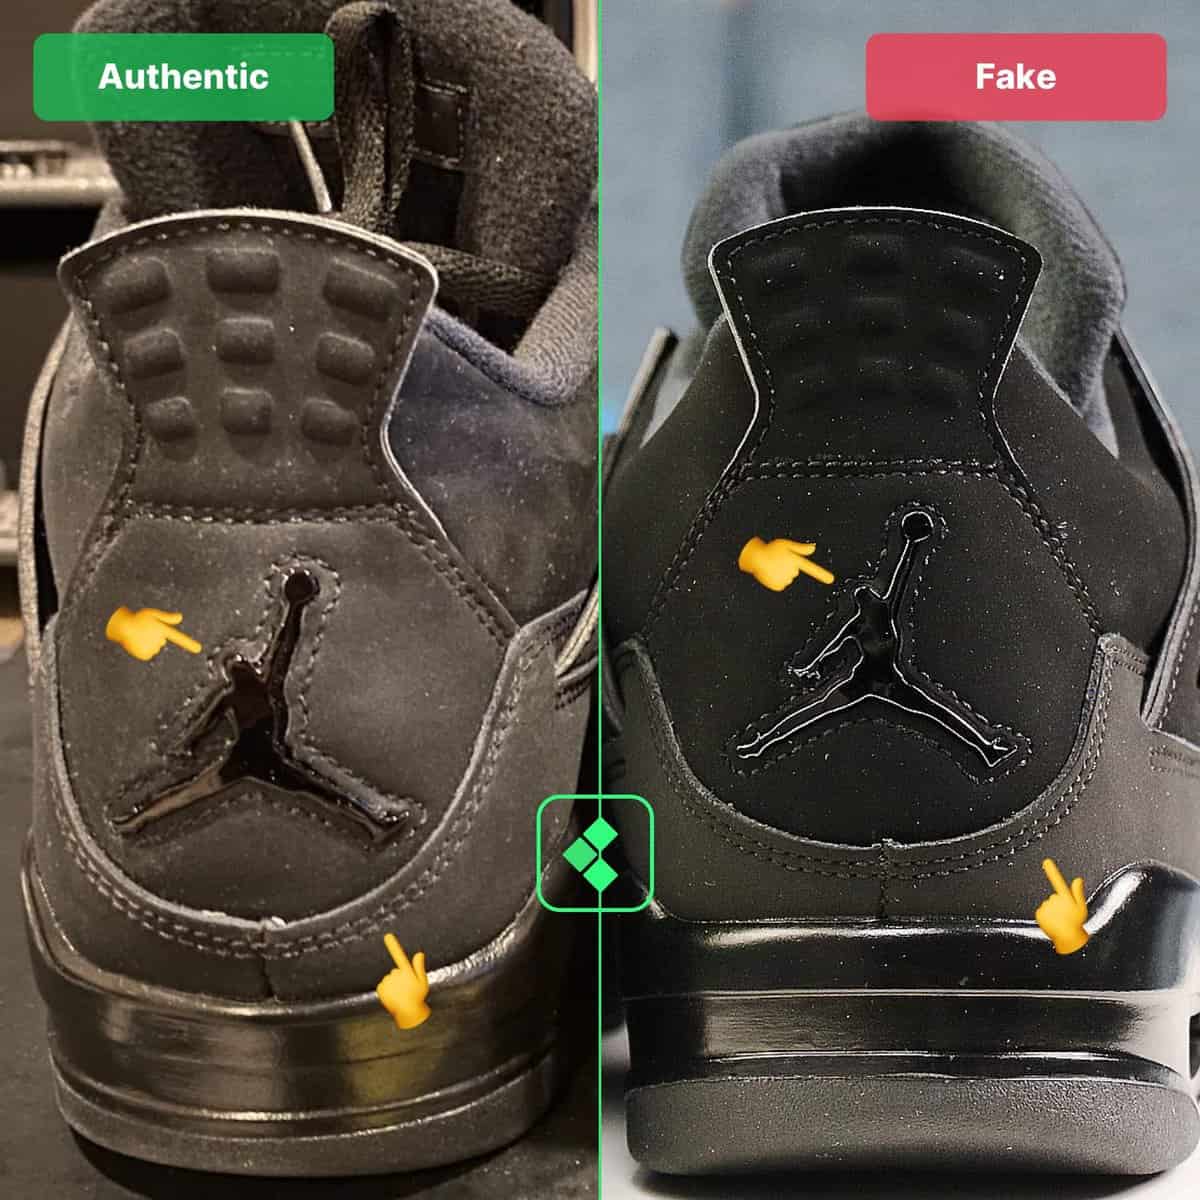 How do I know if my jordan retro 4 are original? Find out in 5